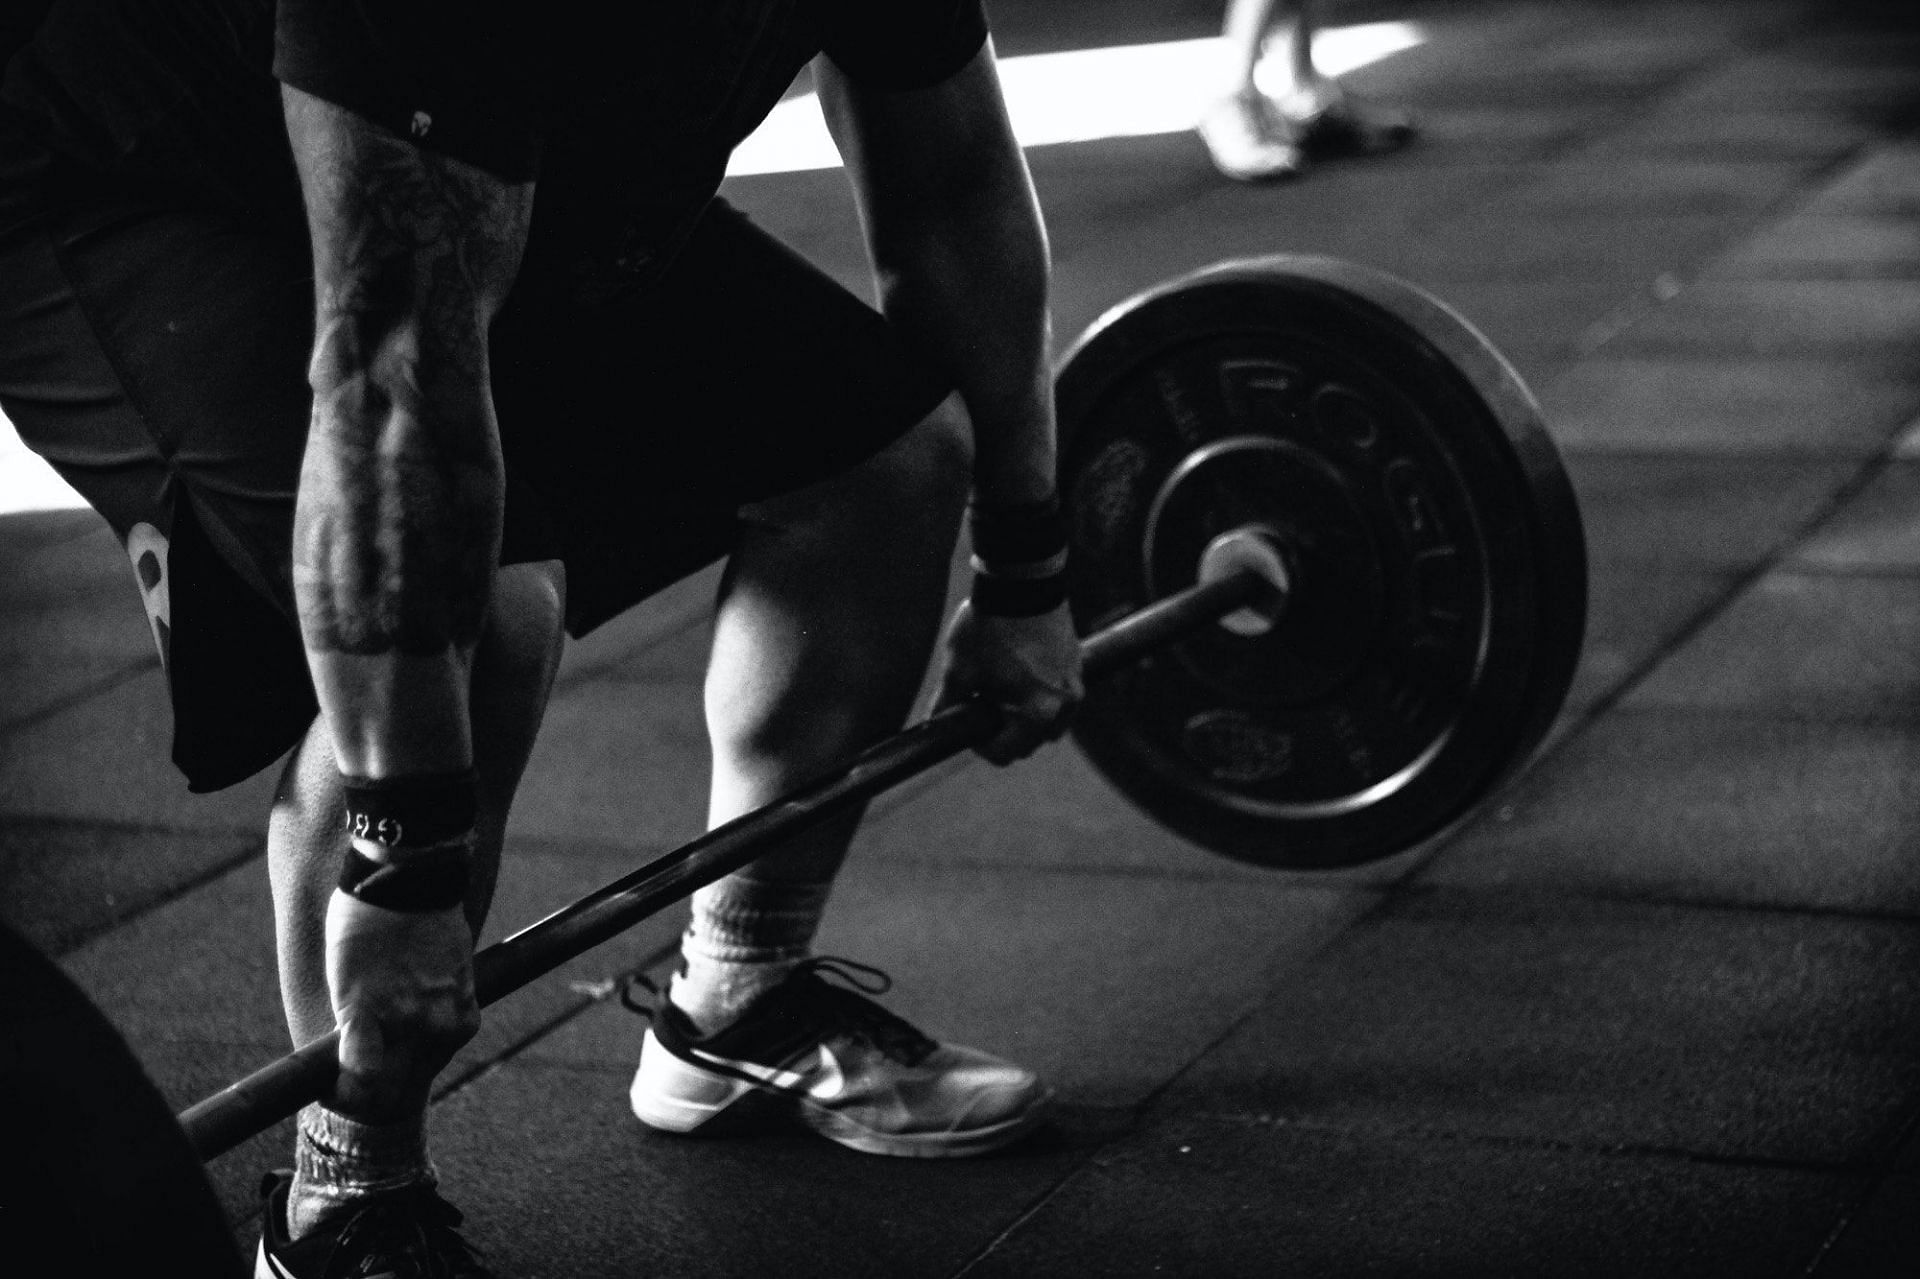 Remember, lift weights to lose weights. (Image via Pexels / Victor Freitas)